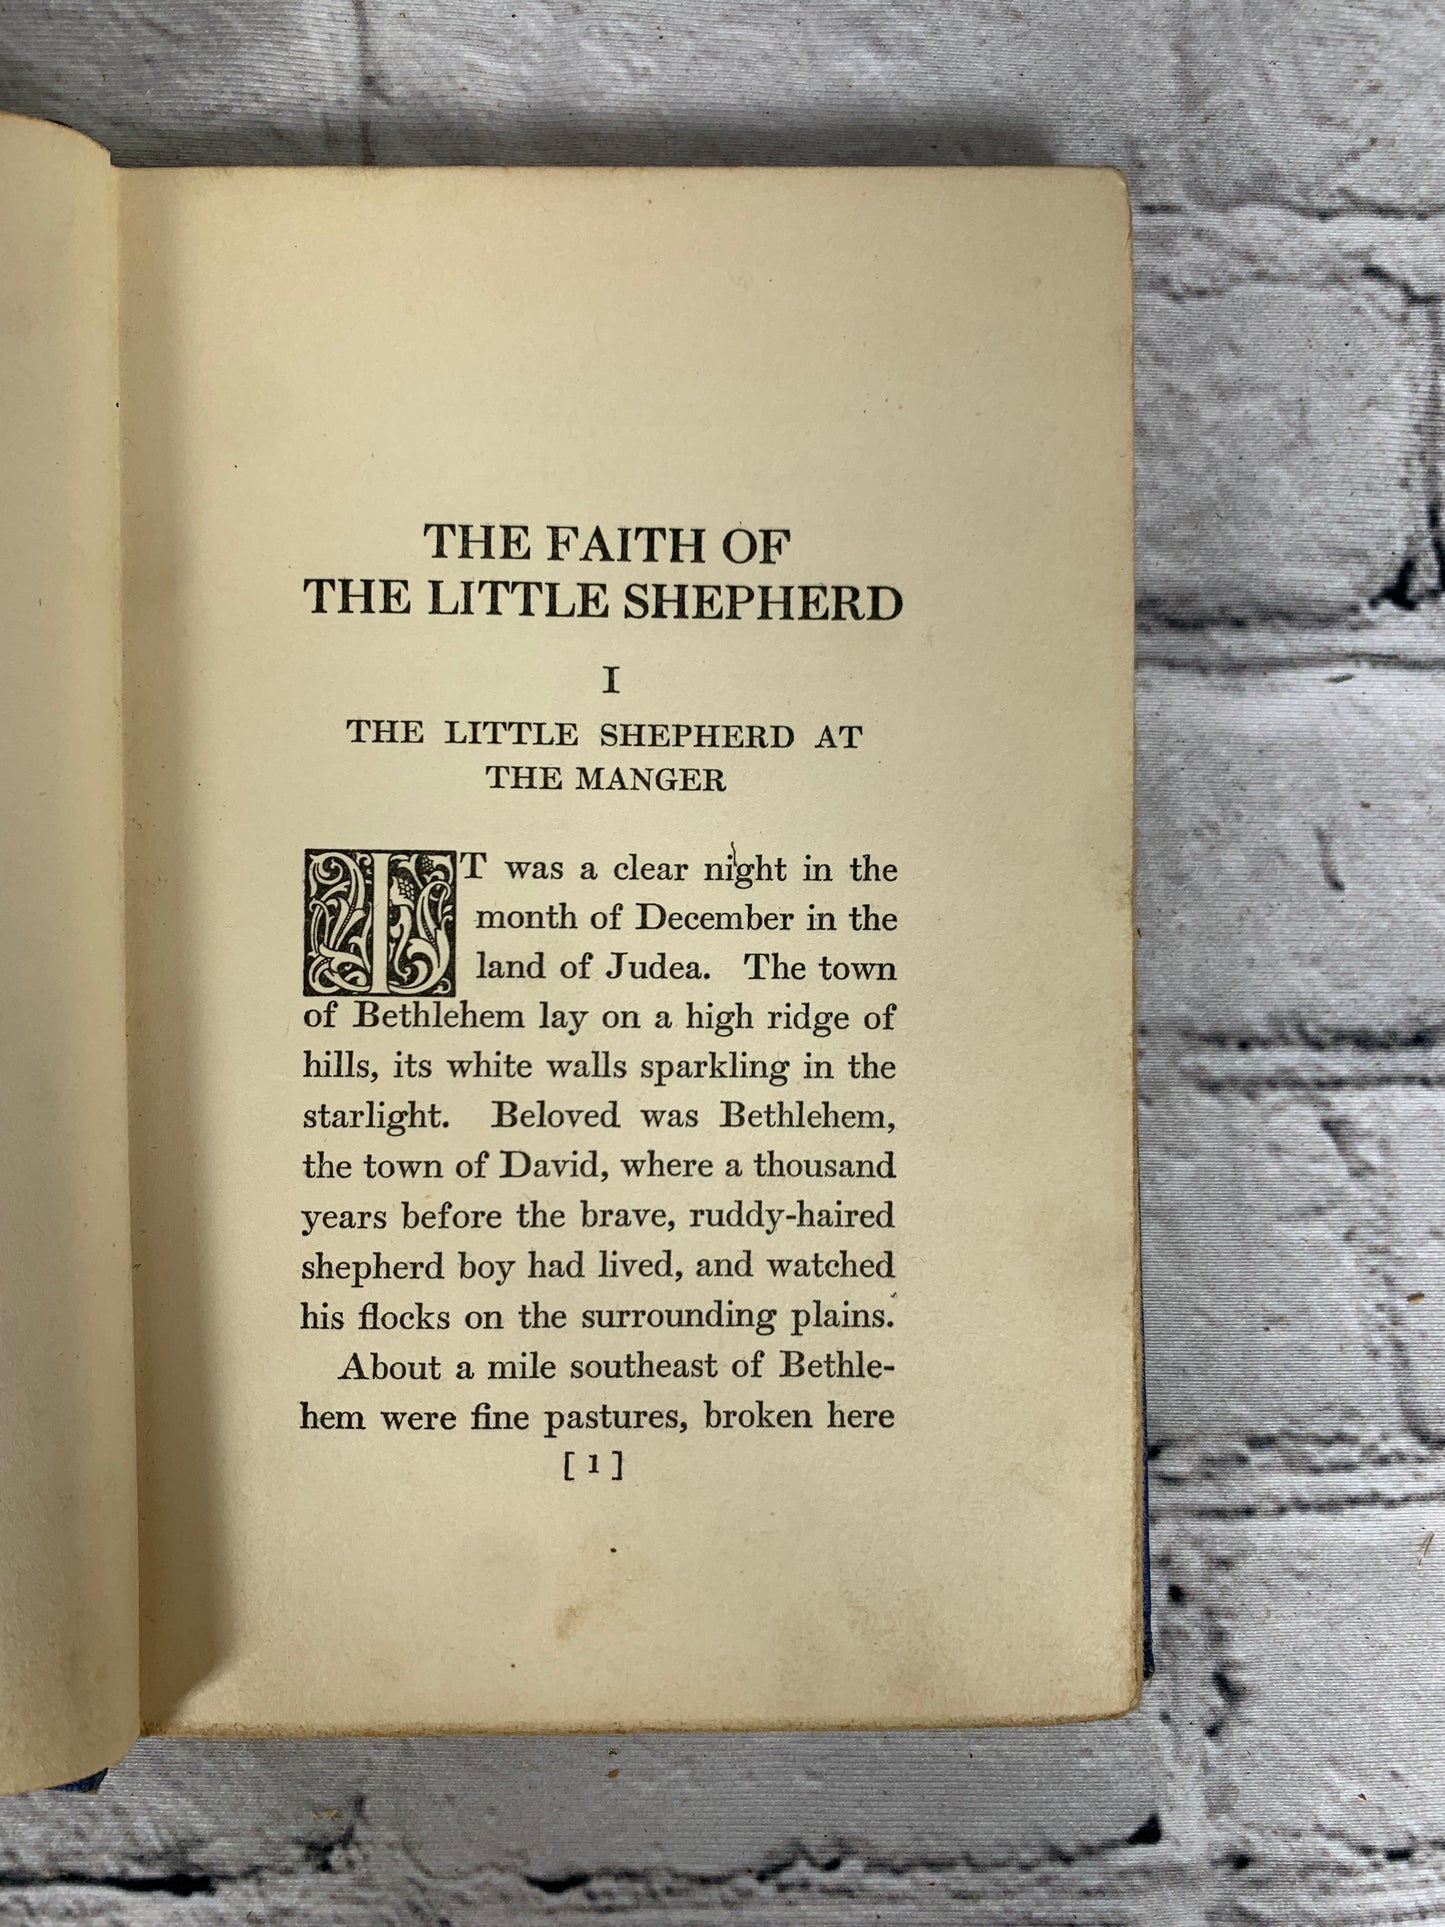 The Faith of the Little Shepherd by Grace Adele Catherwood  [1926]